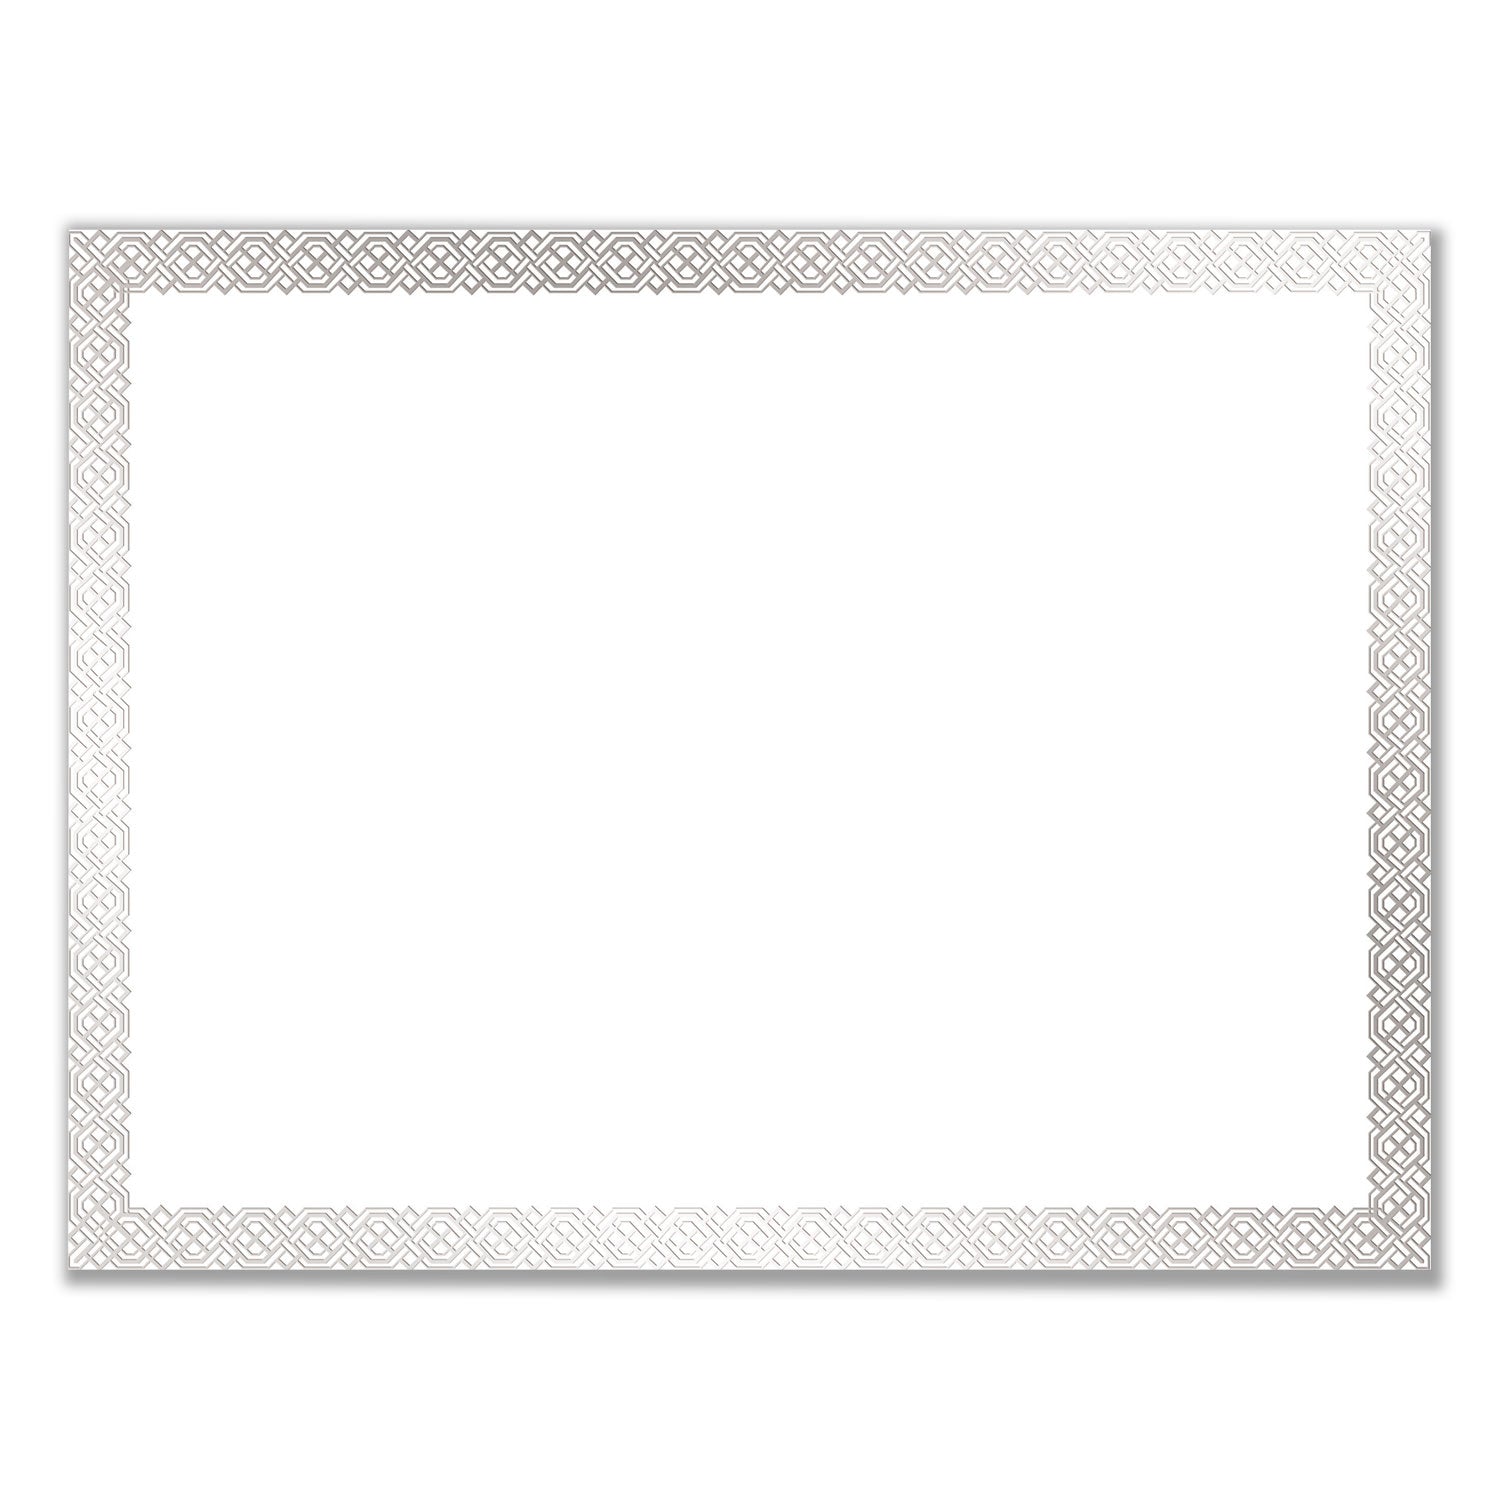 foil-border-certificates-85-x-11-white-silver-with-braided-silver-border15-pack_cos963027 - 1